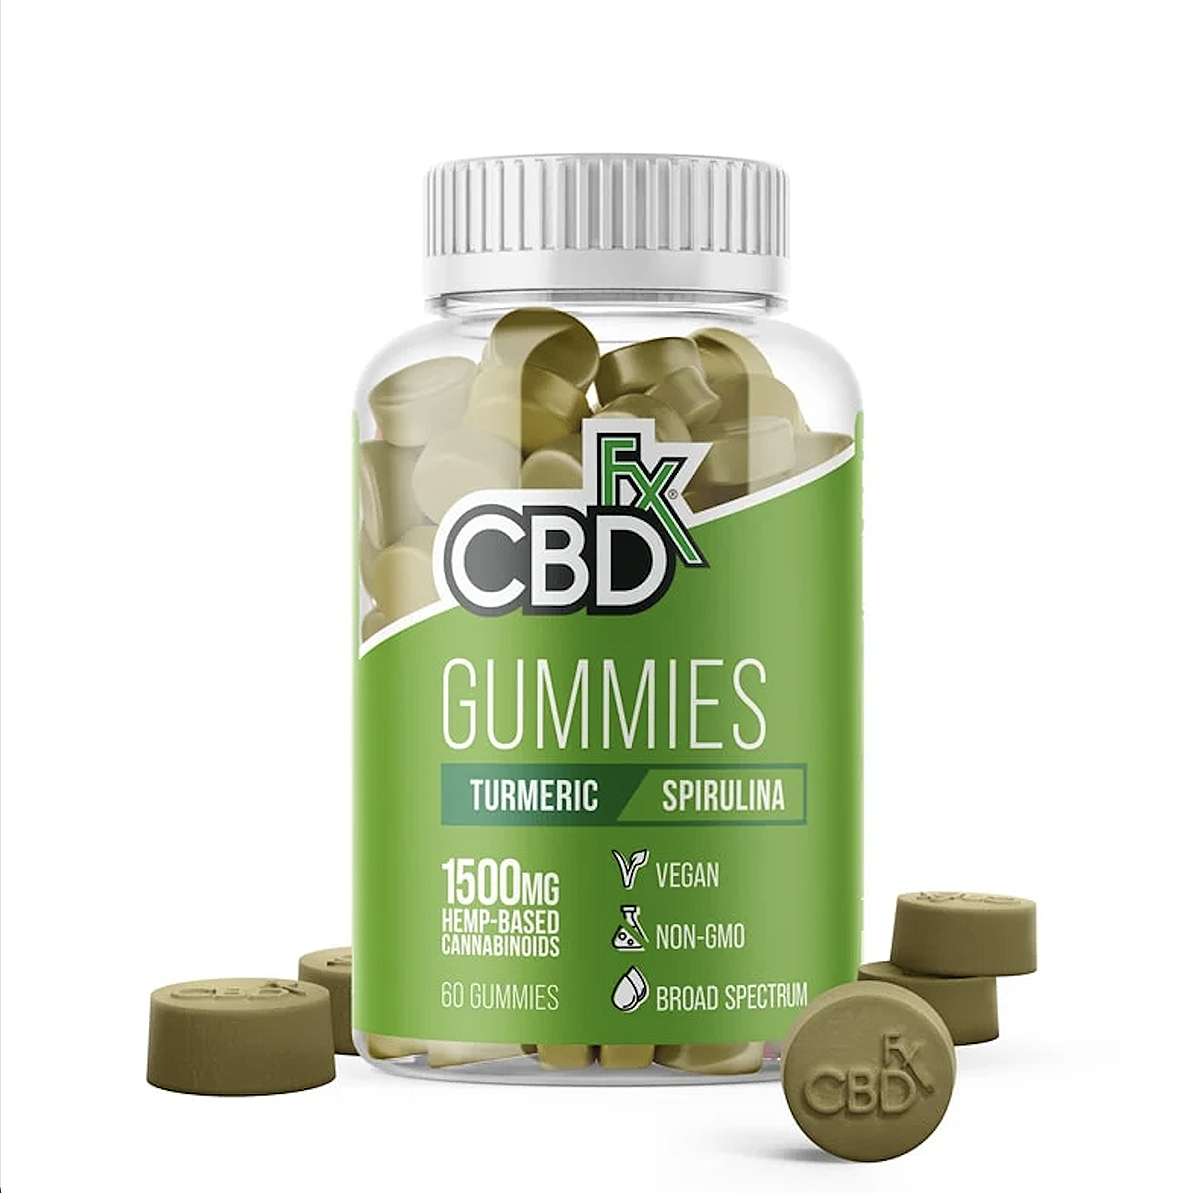 are CBD gummies bad for you